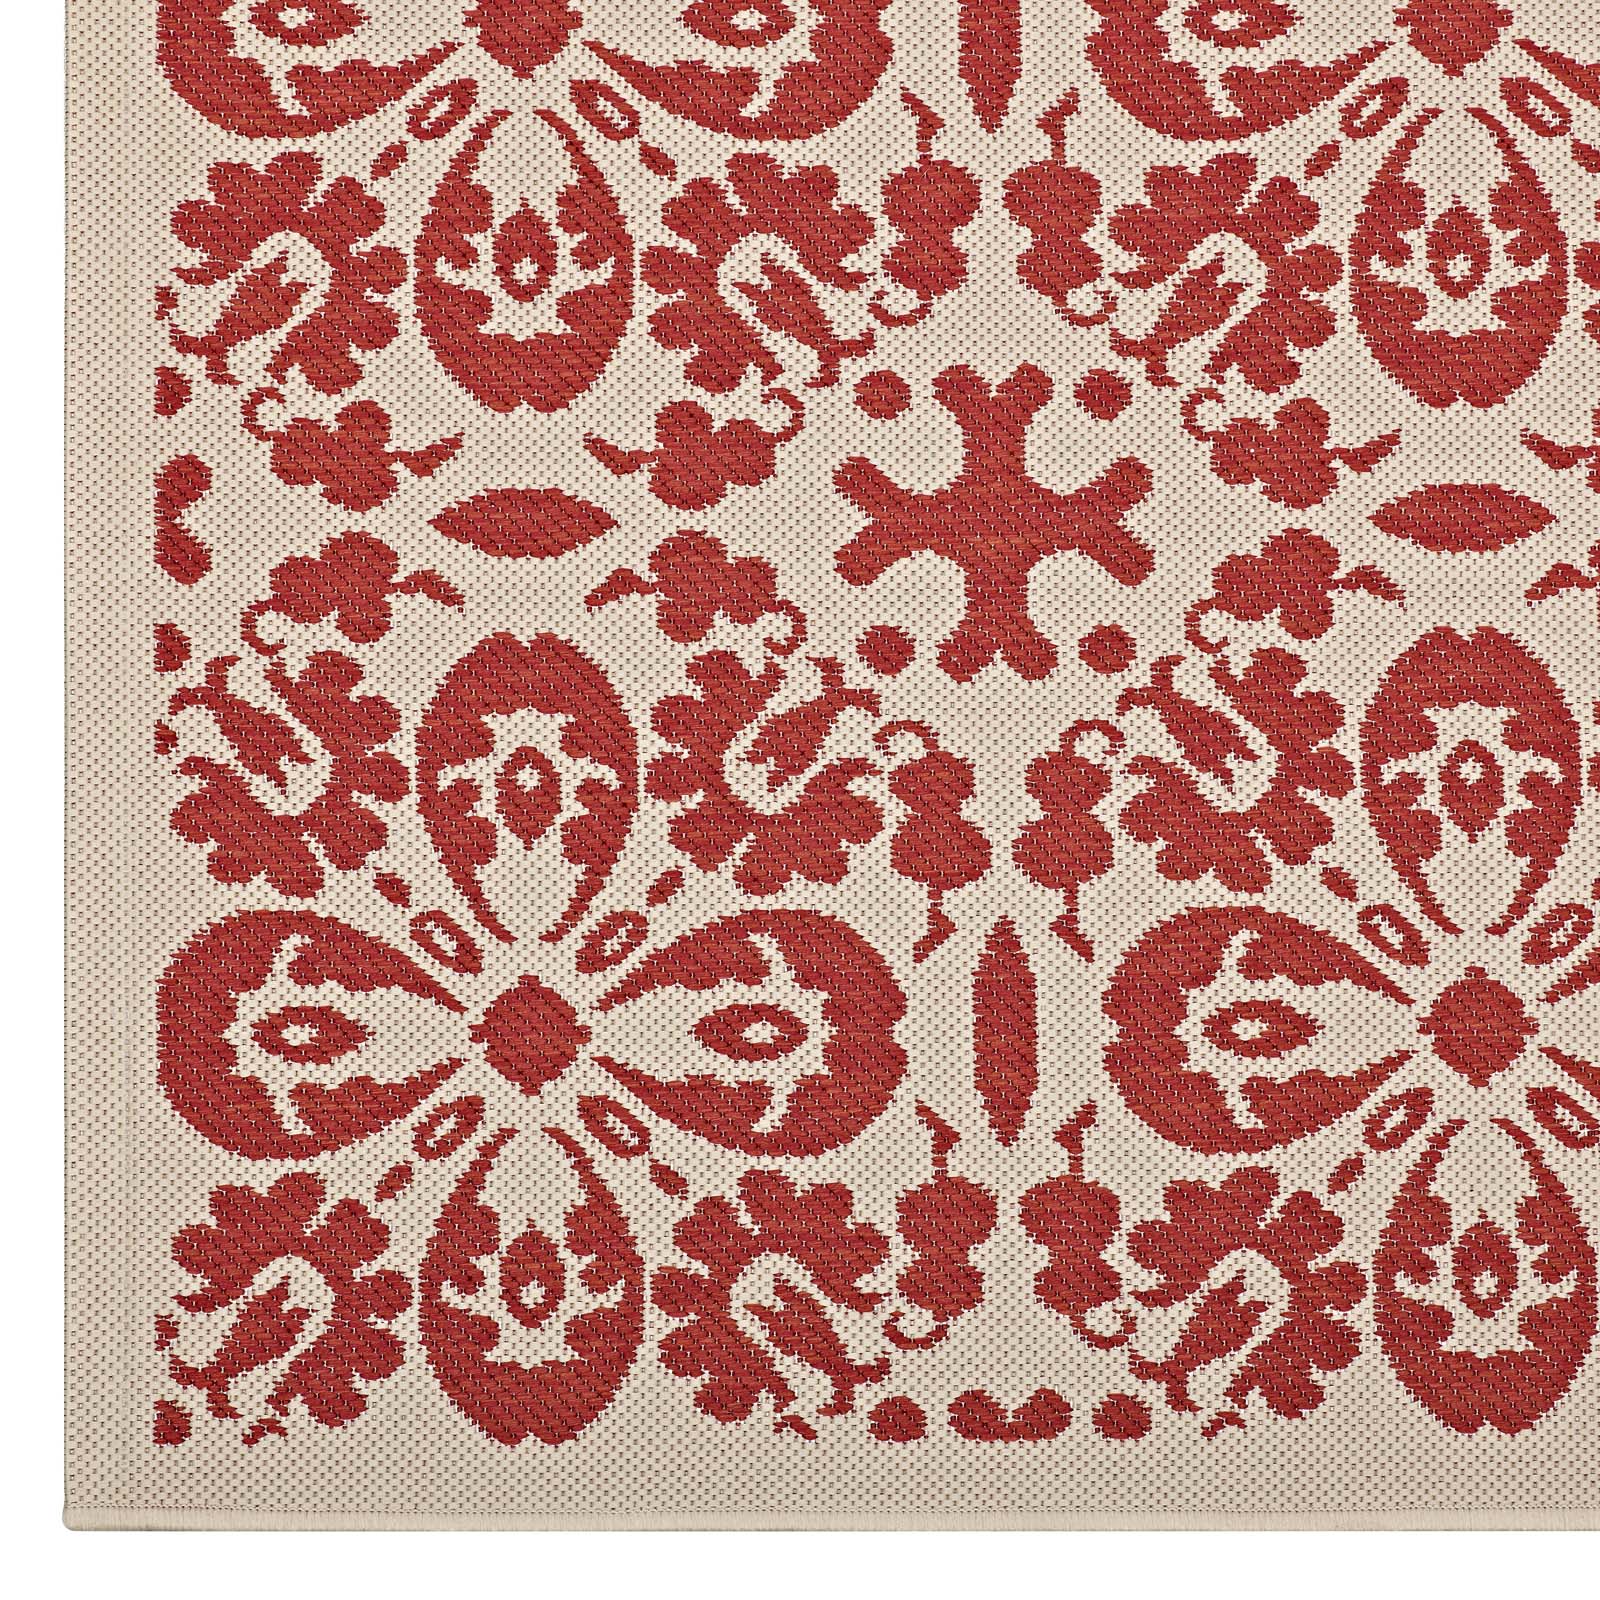 Modway Indoor Rugs - Ariana Vintage Floral Trellis 4x6 Indoor and Outdoor Area Rug Red and Beige